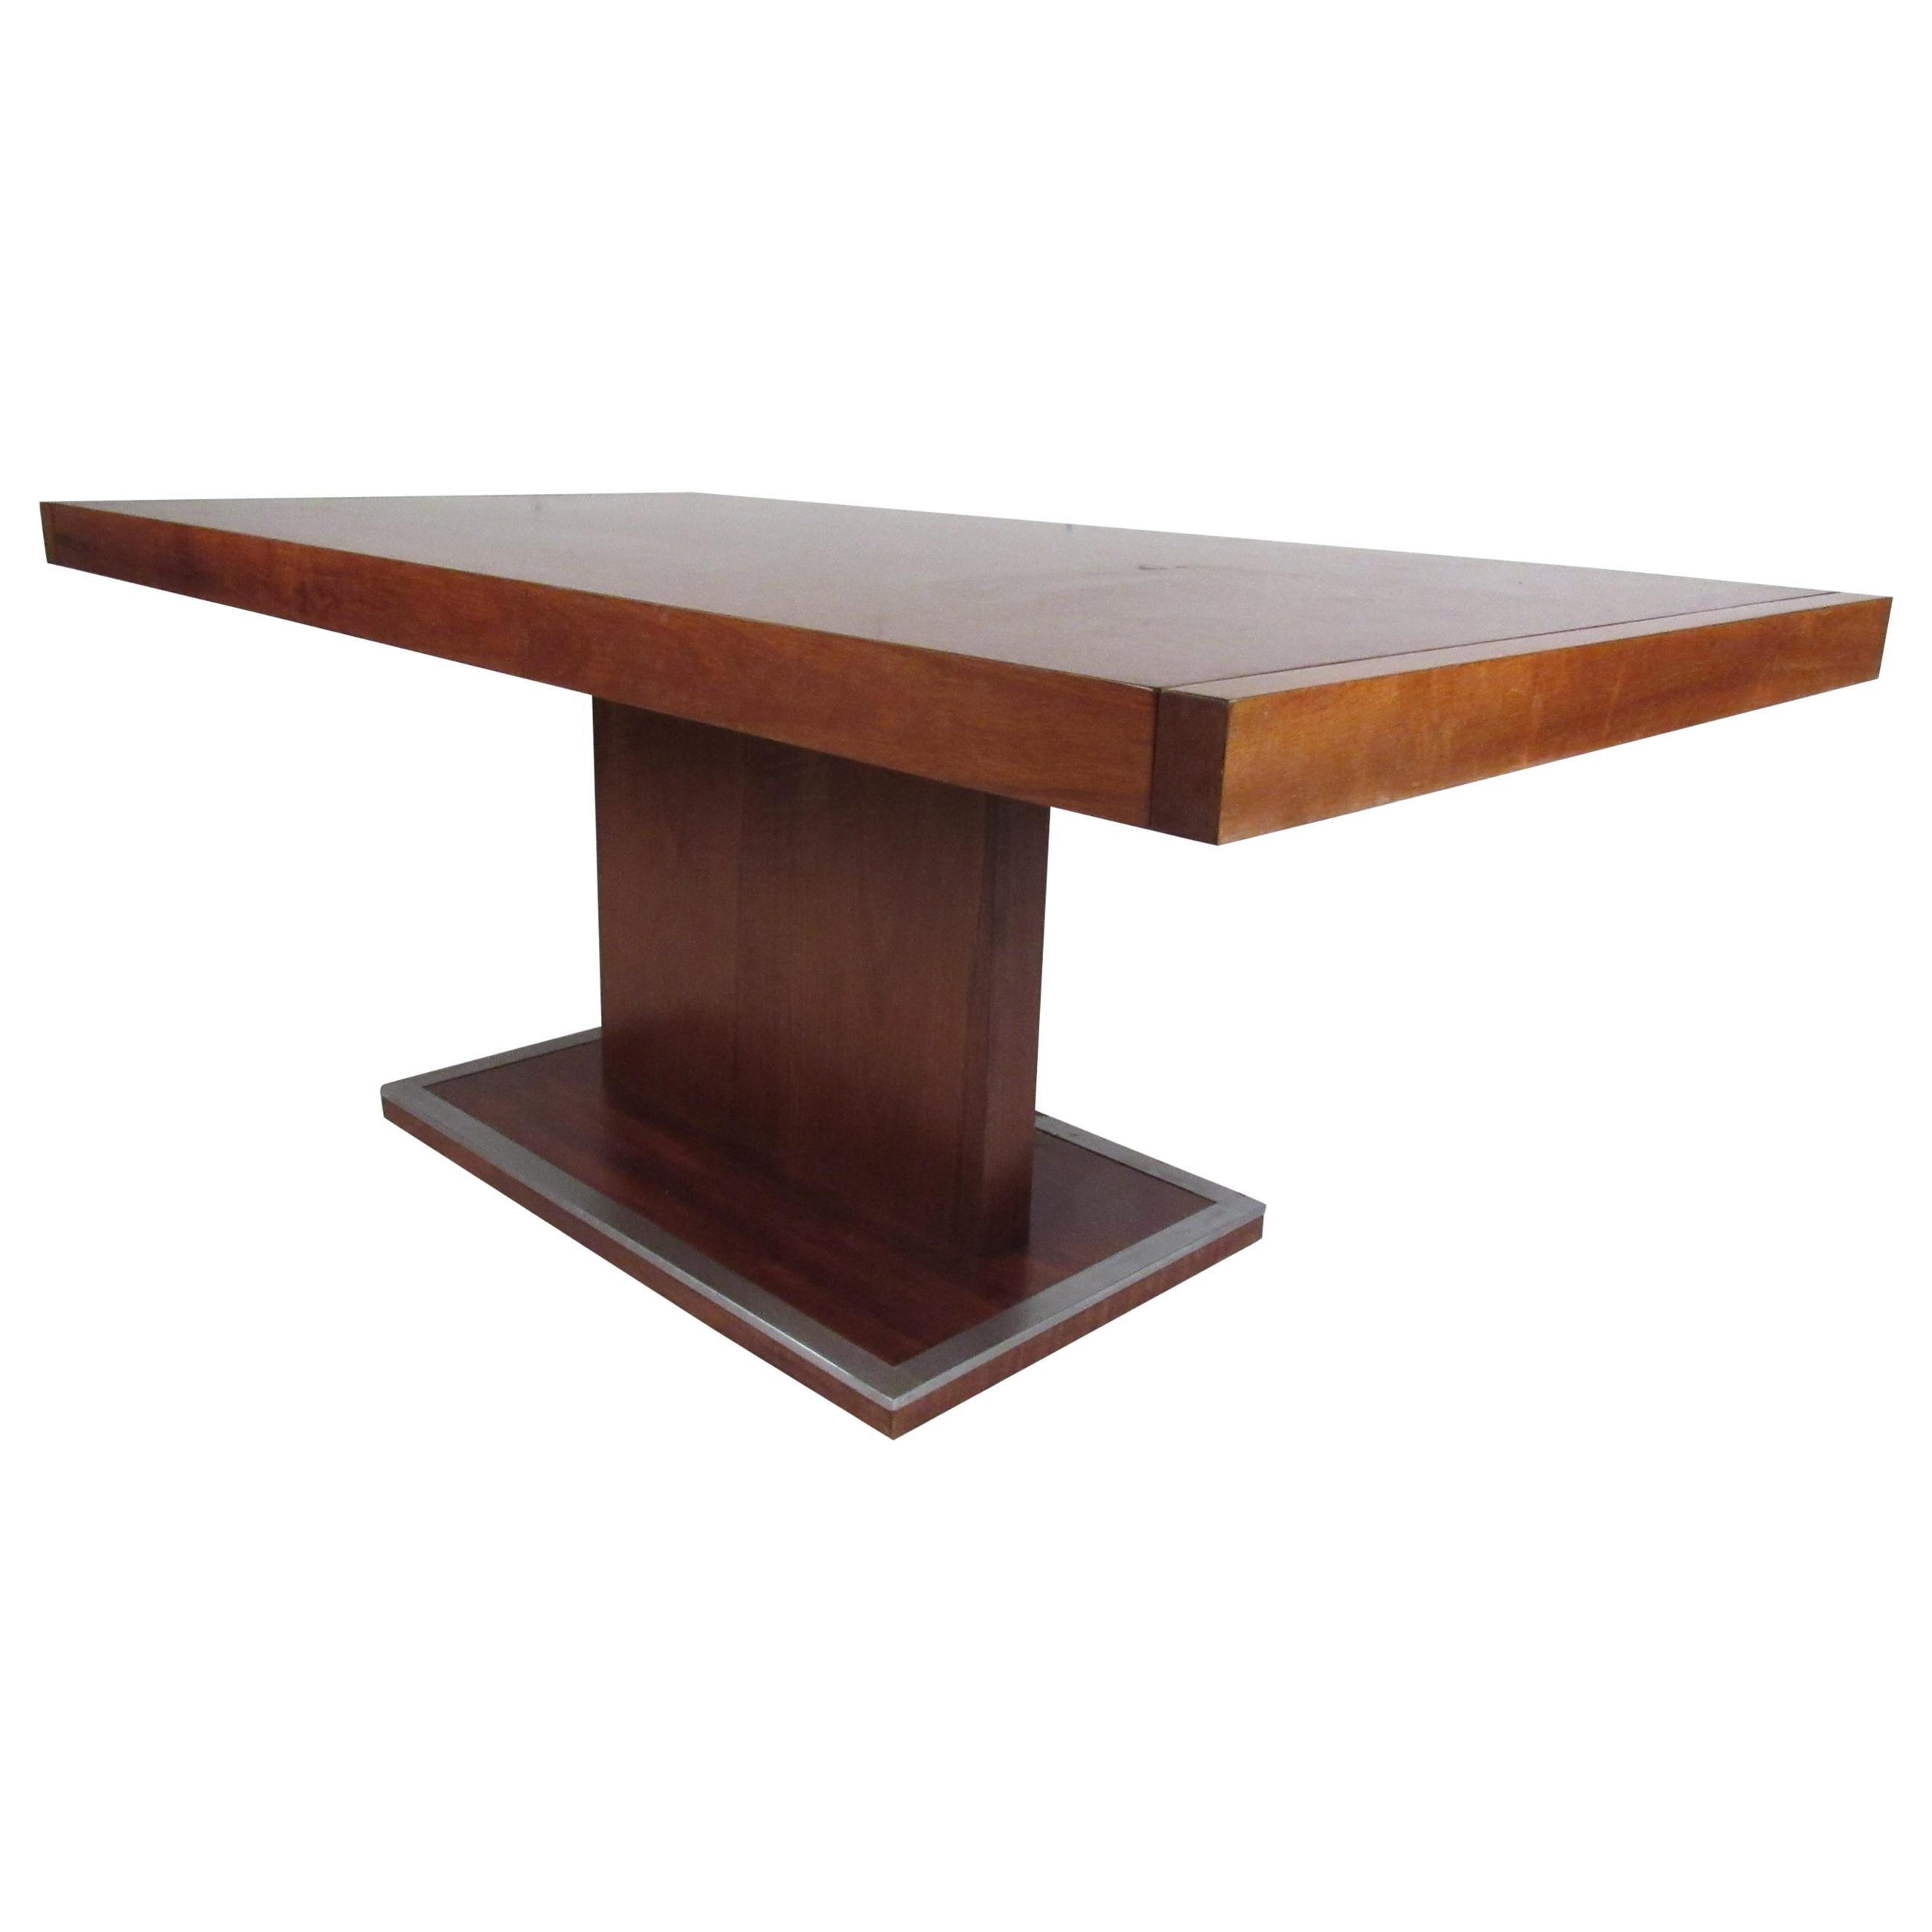 Mid-Century Modern Walnut Dining Table with a Pedestal Base